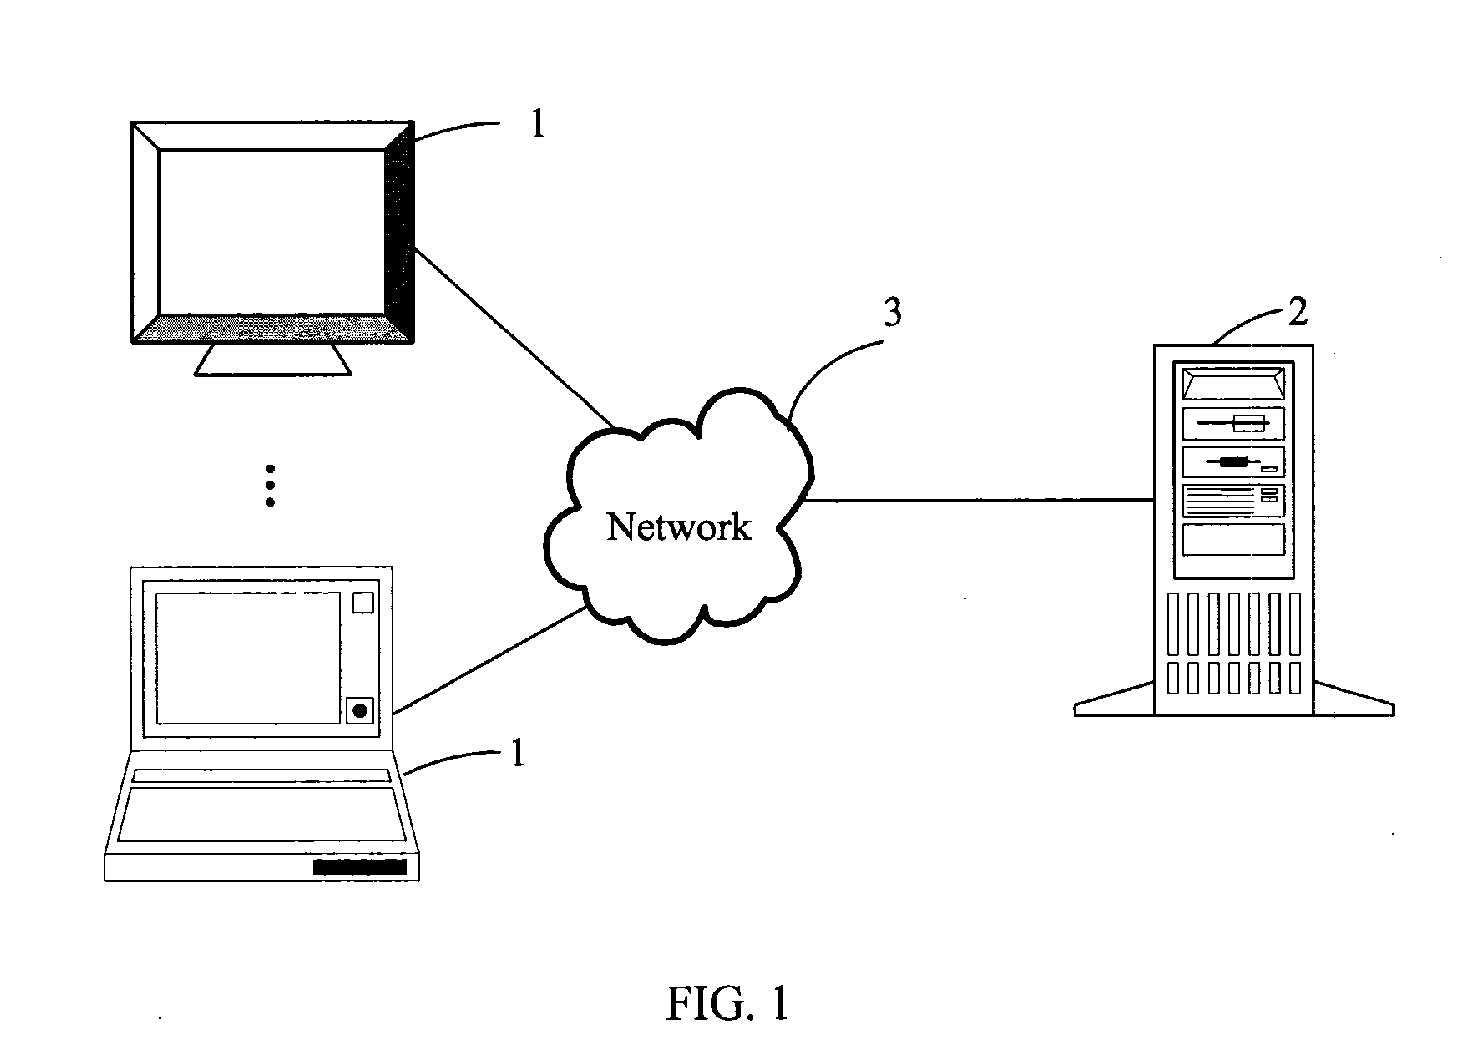 System and method for transmitting data quickly between a client and a server